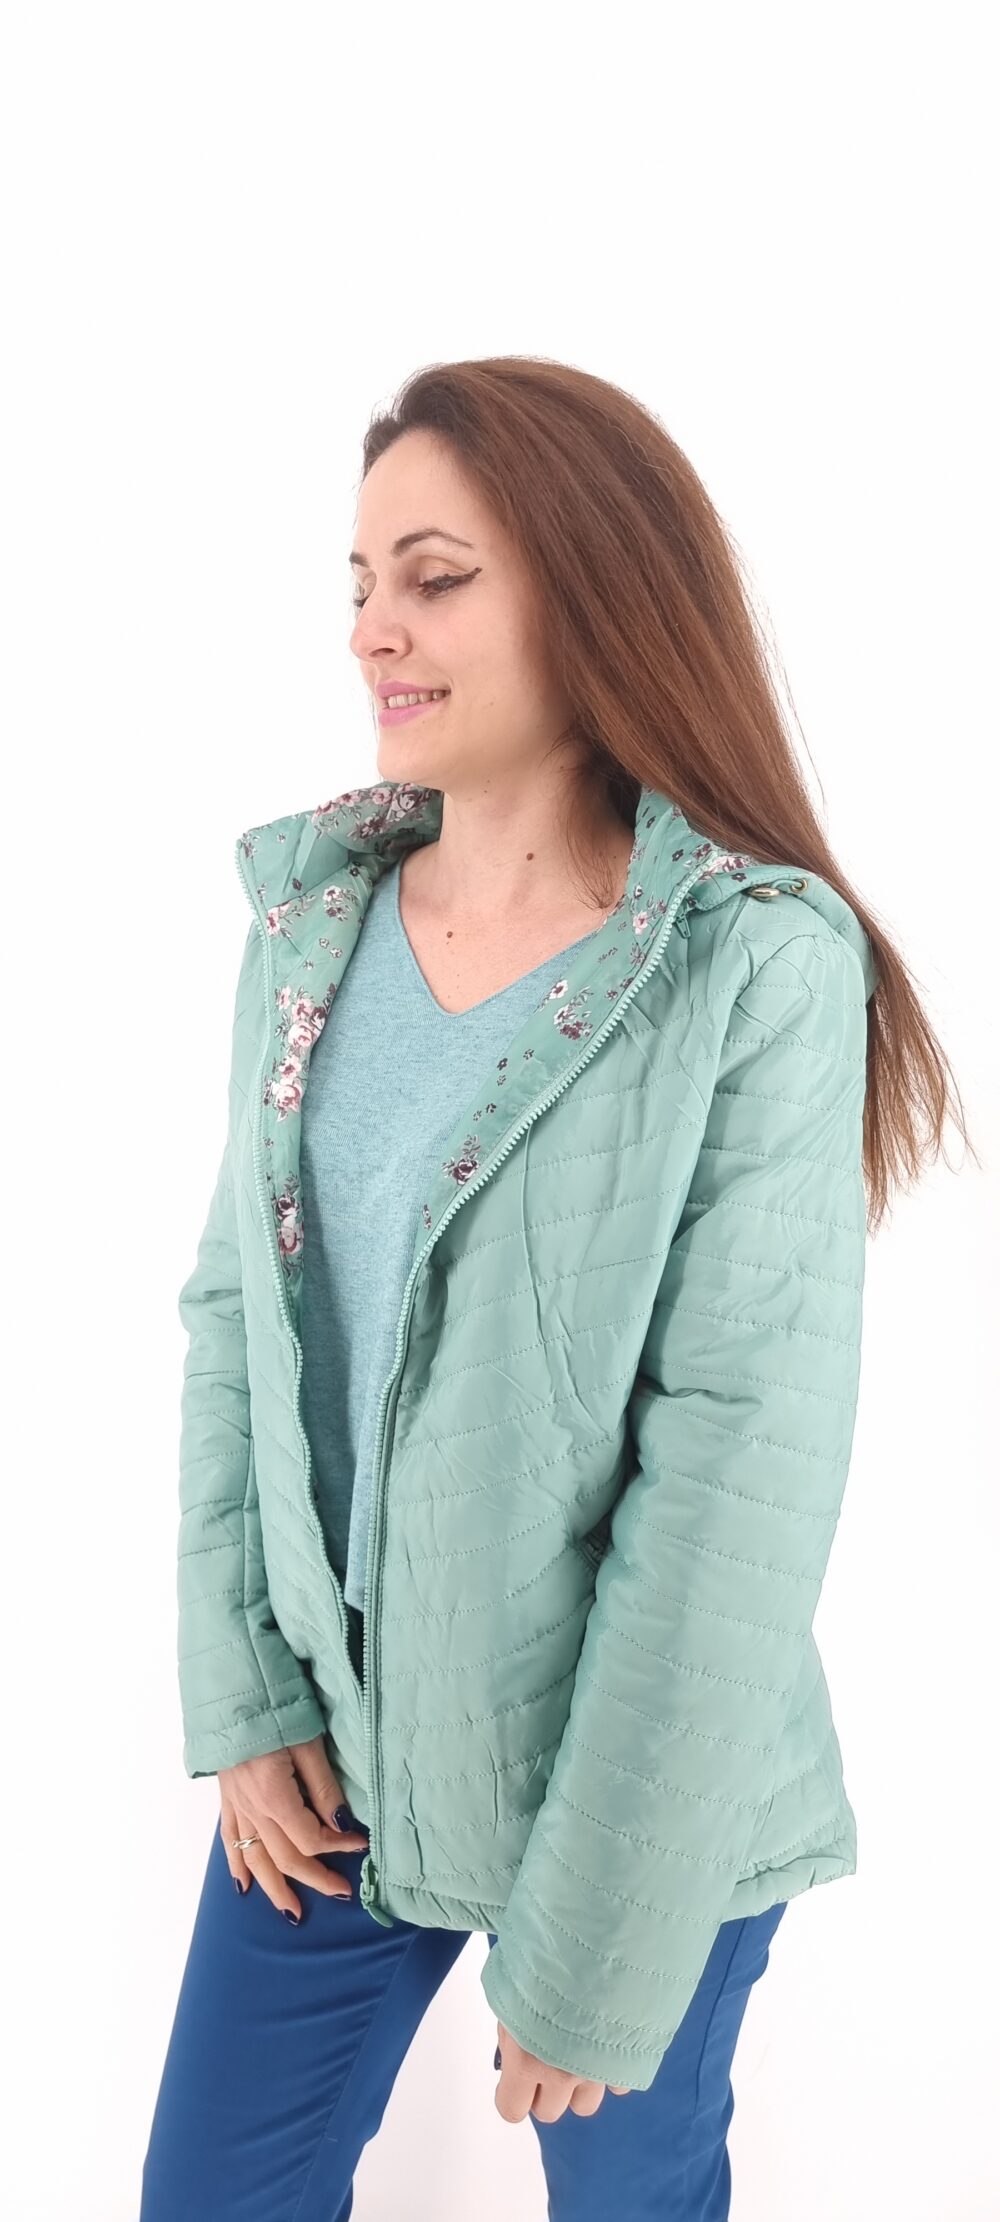 Bright green double-sided jacket